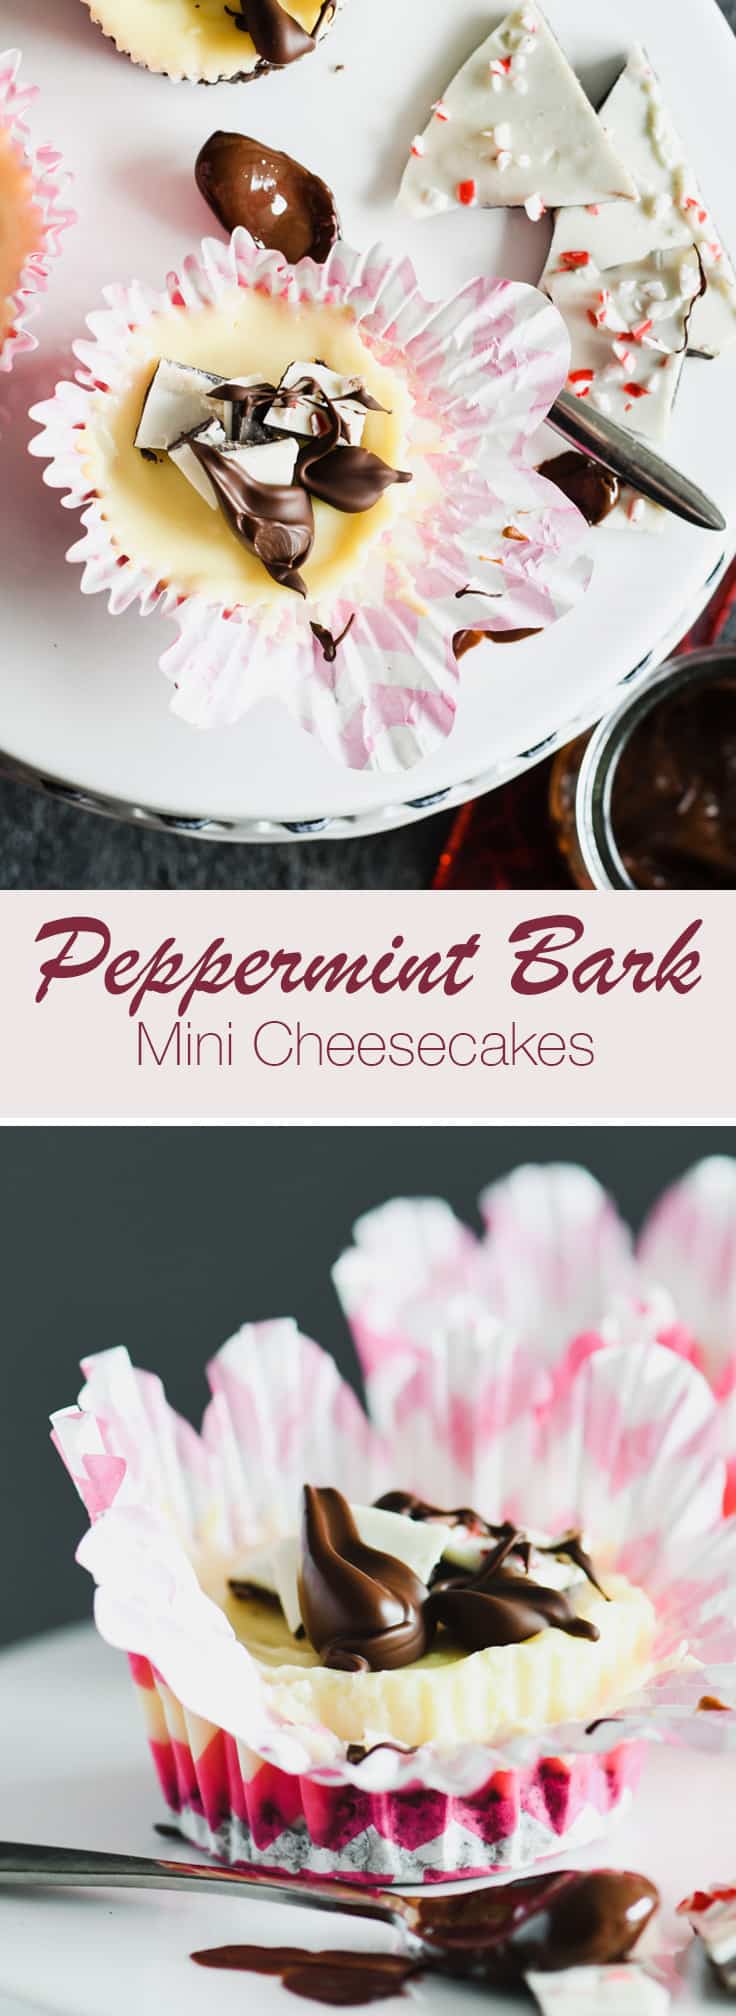 These Peppermint Bark Mini Cheesecakes are the perfect dessert for a holiday gathering.